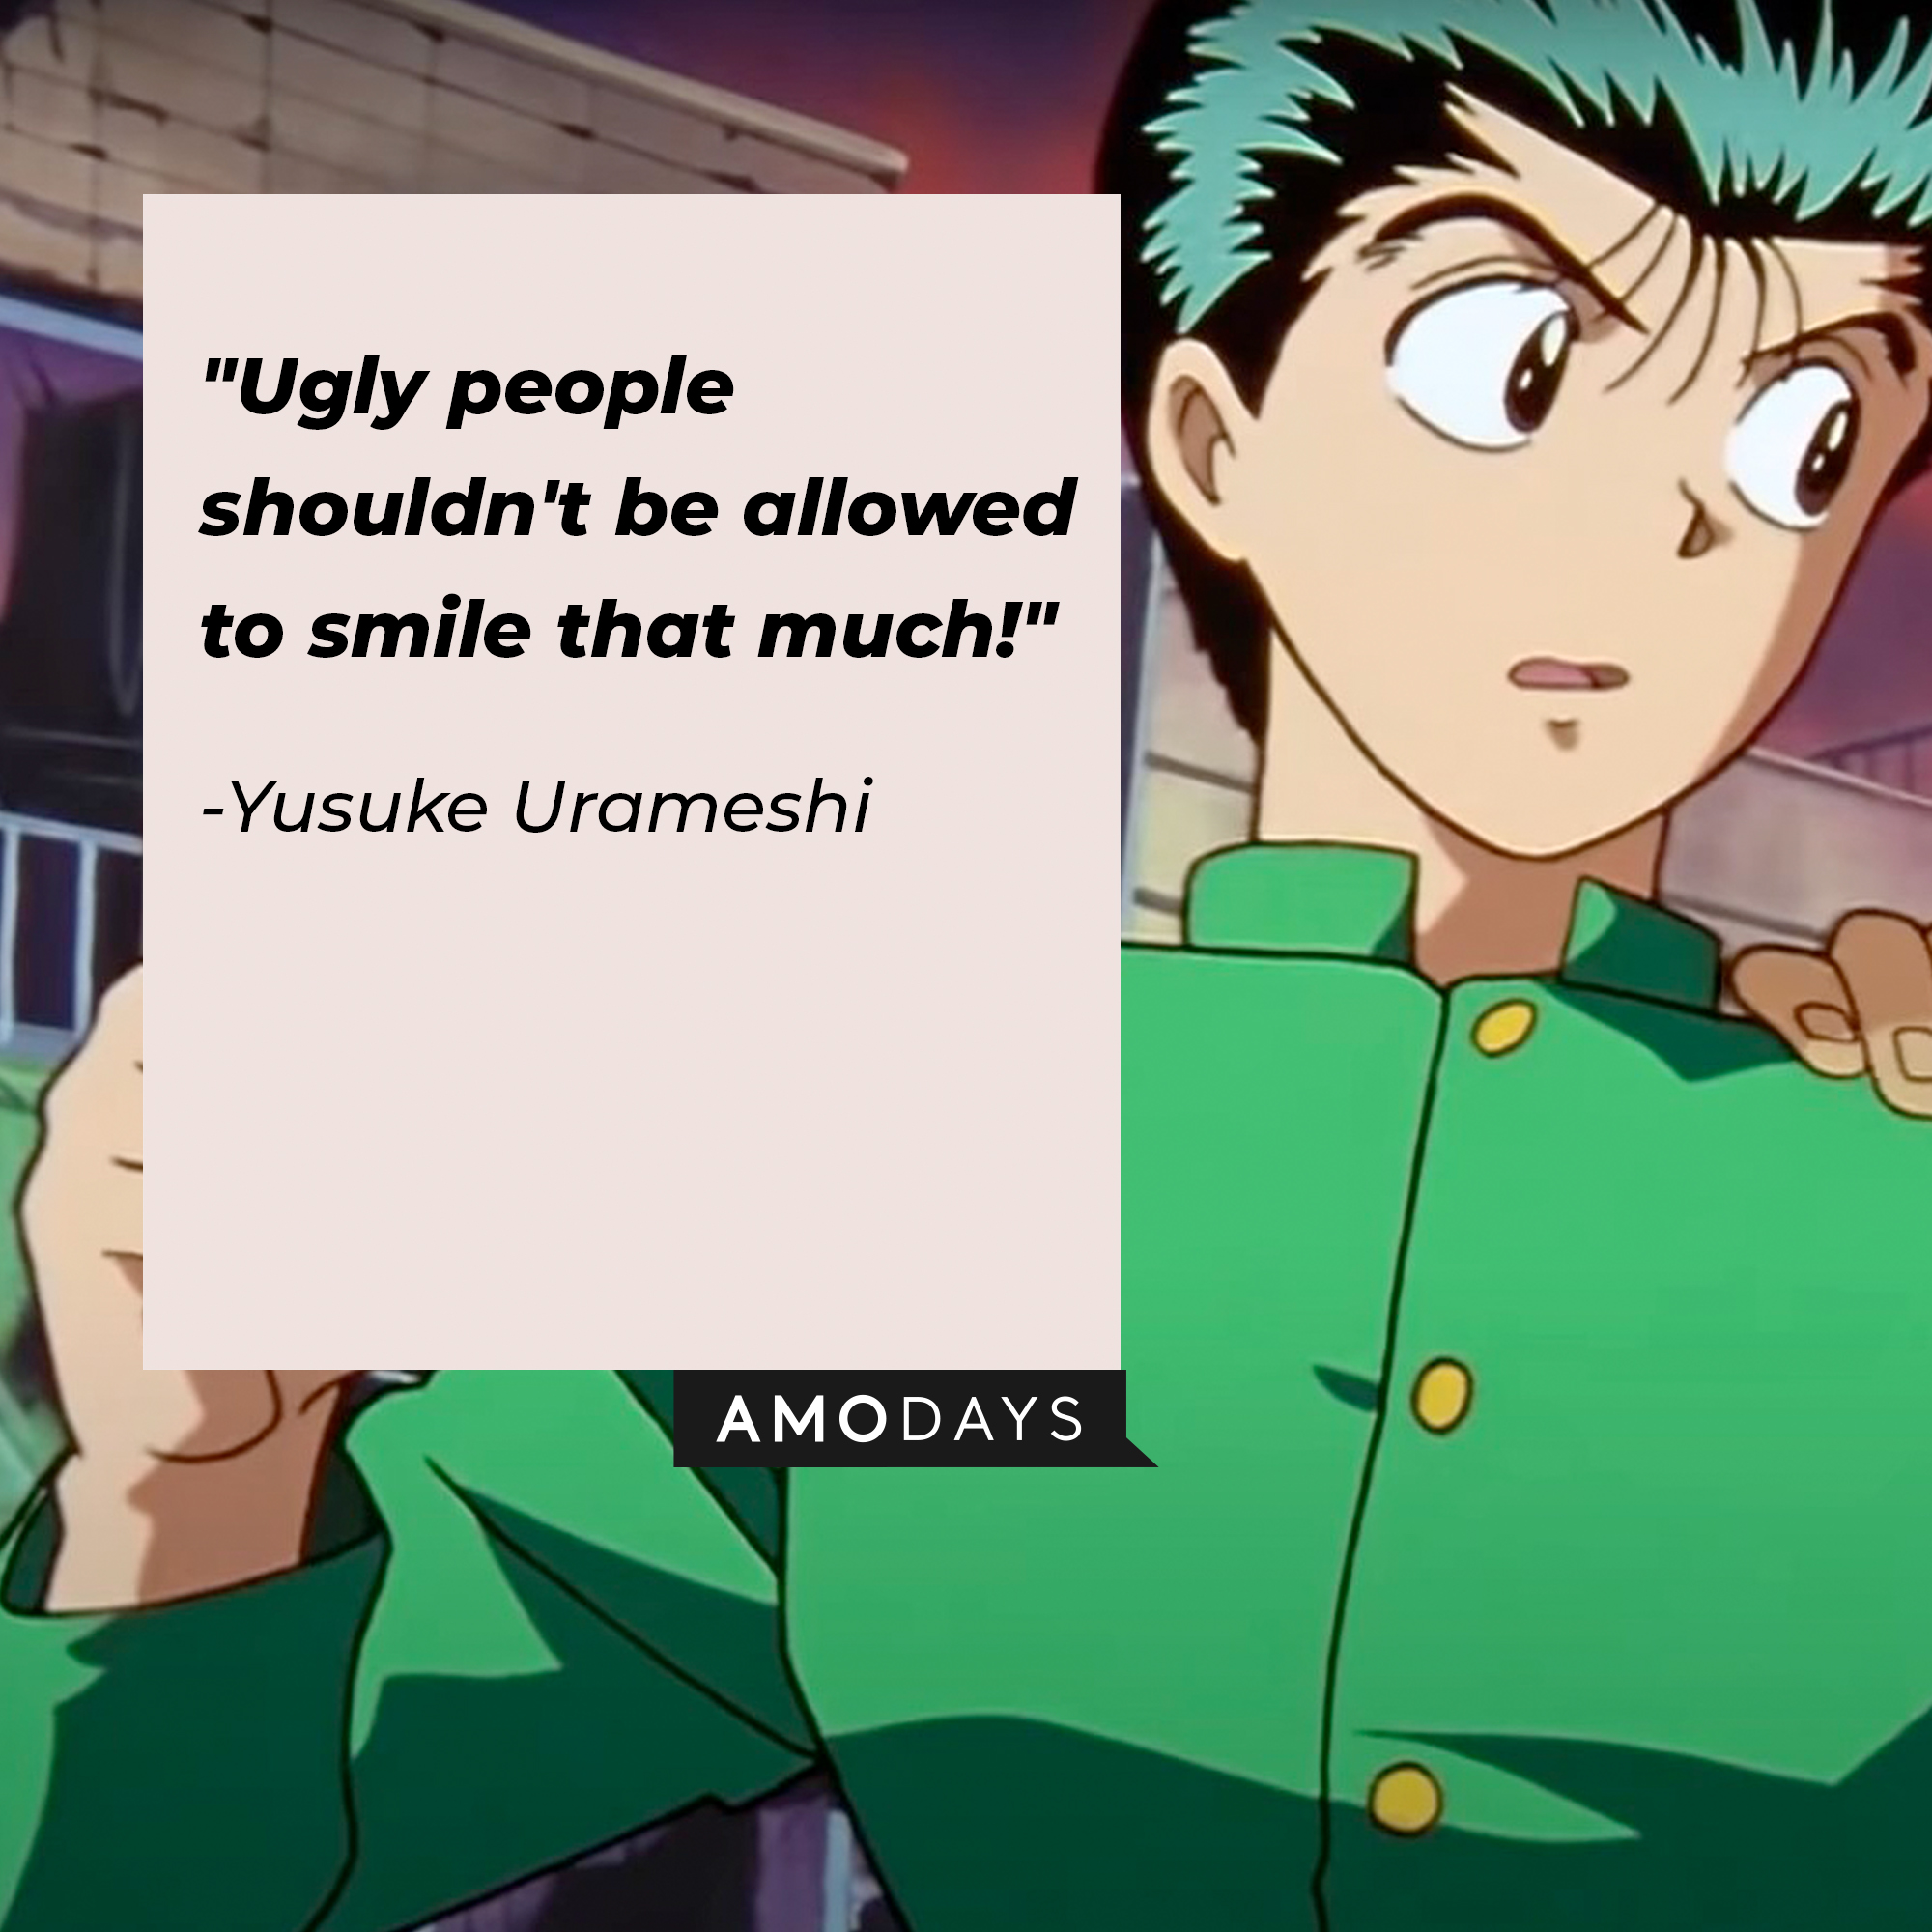 Yusuke Urameshi's quote: "Ugly people shouldn't be allowed to smile that much!" | Source: Facebook.com/watchyuyuhakusho